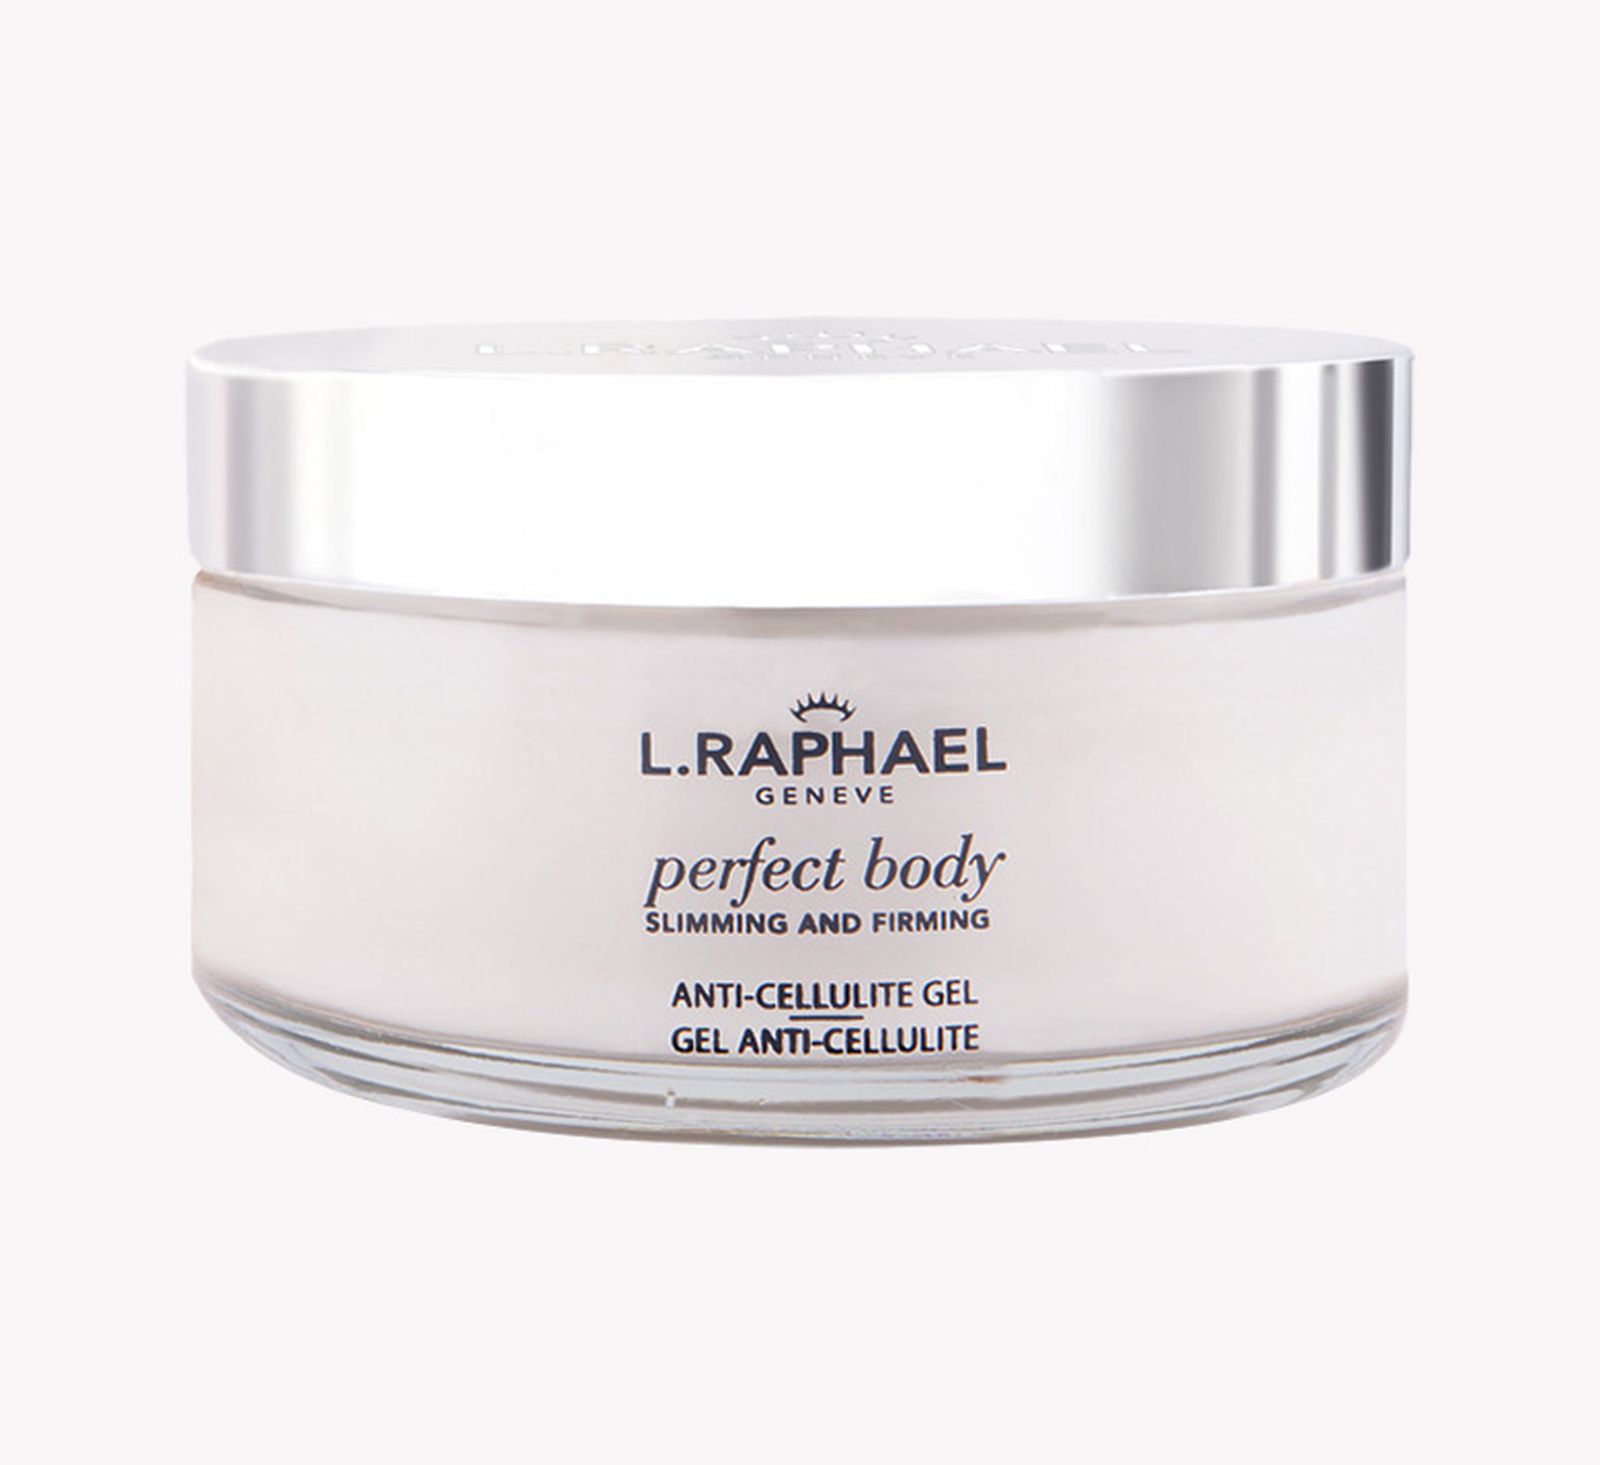 L.Raphael Slimming and Firming Anti-Cellulite Gel Perfect Body